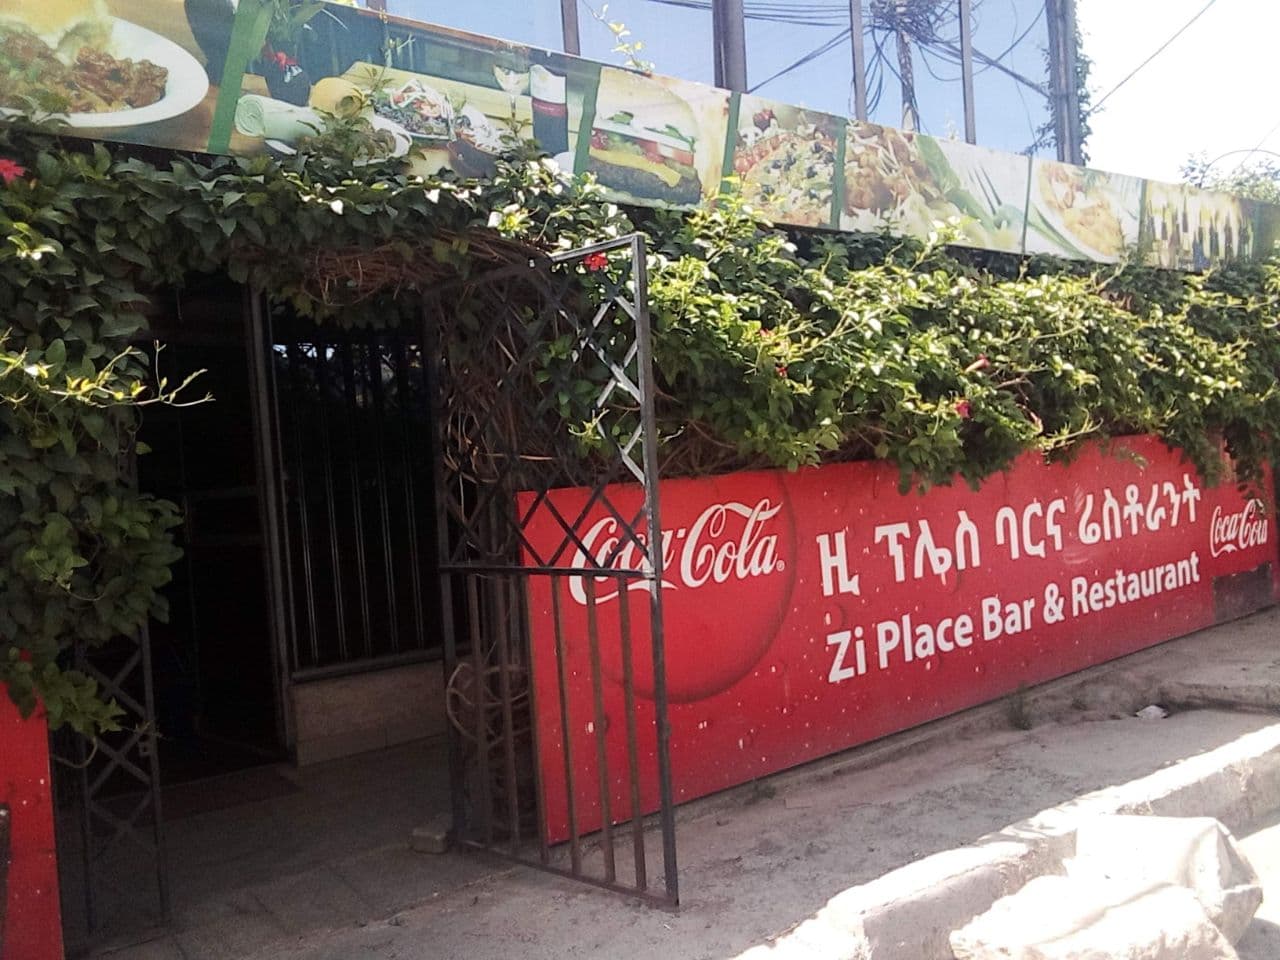 ZI place Bar and Restaurant